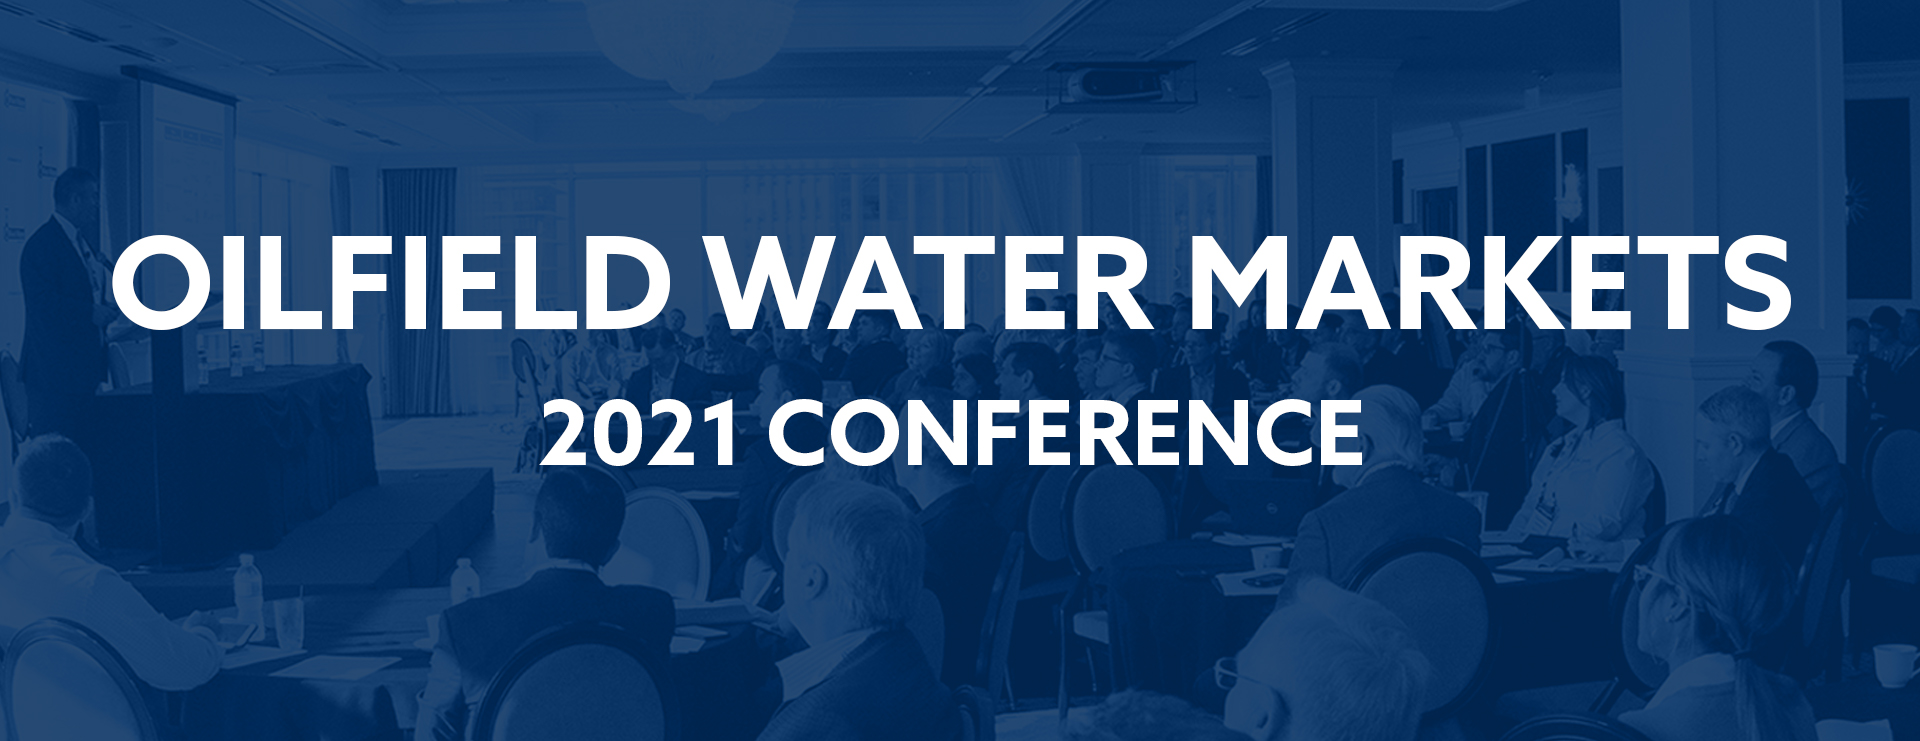 The Oilfield Water Markets 2021 Conference